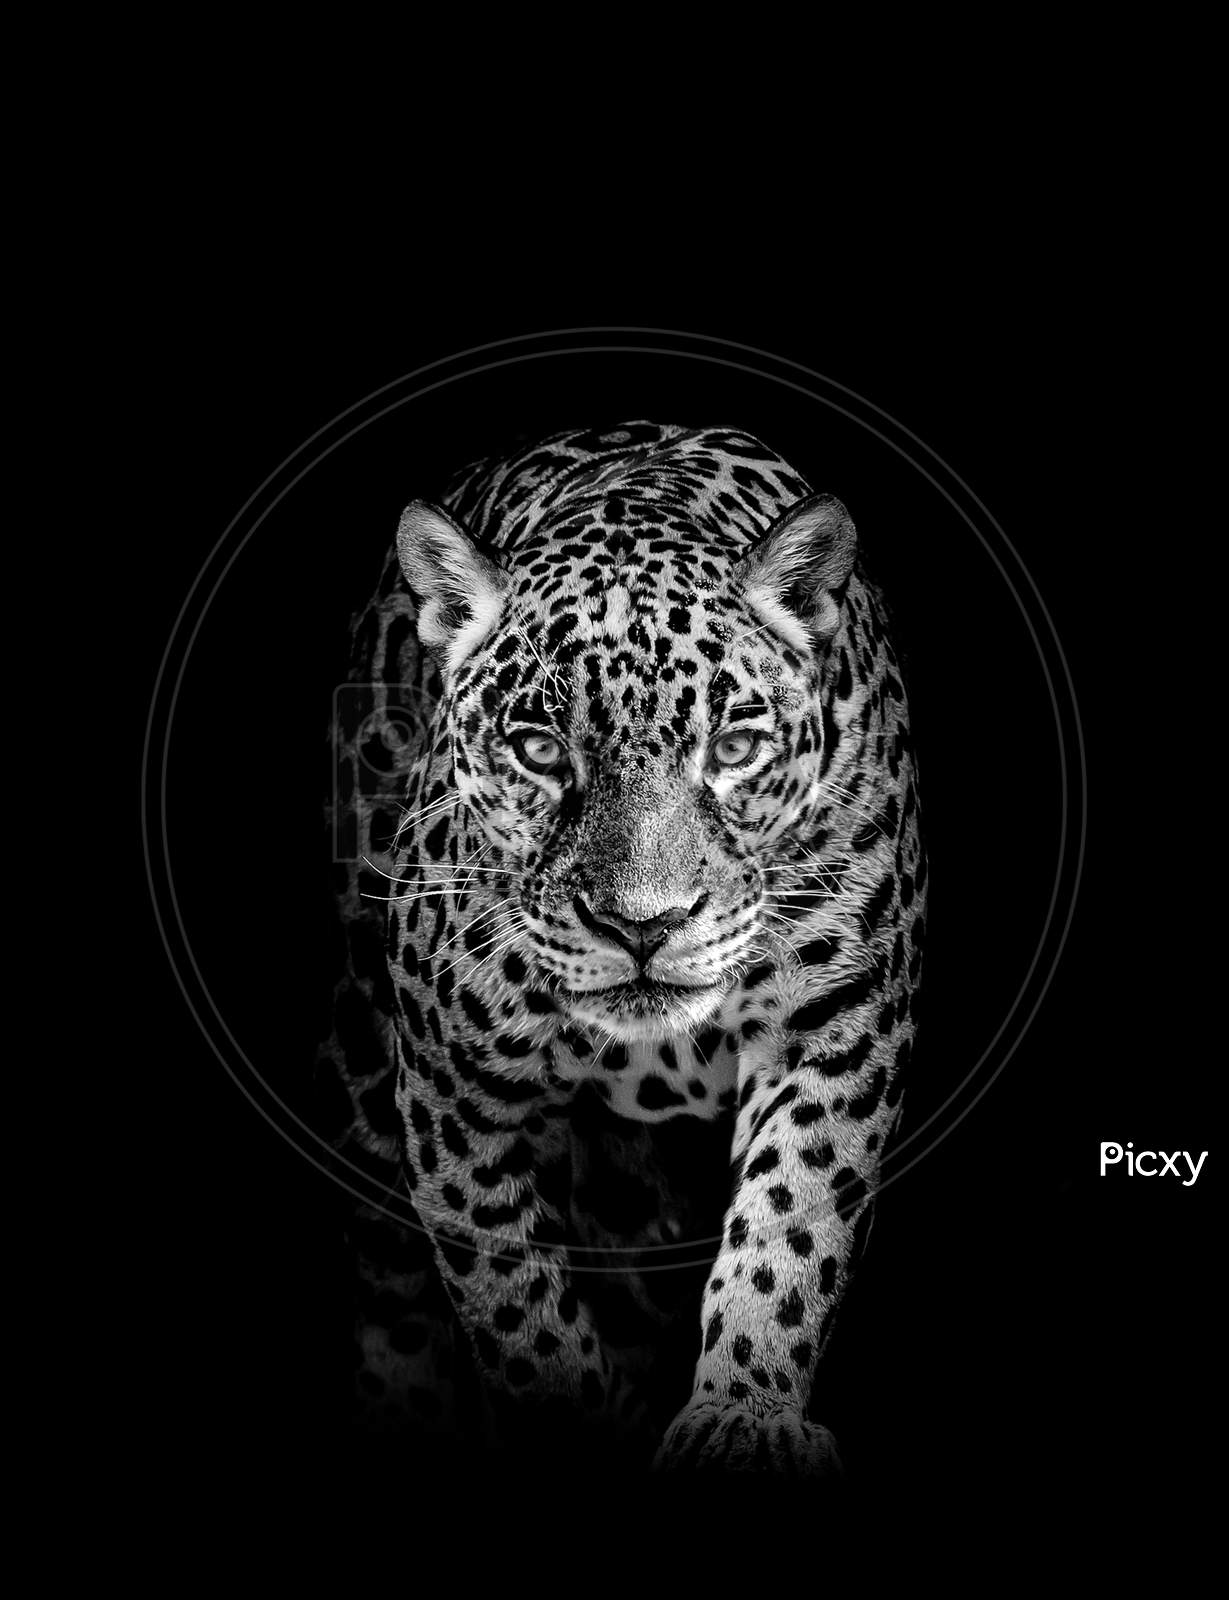 Leopard face profile , animal abstract isolated